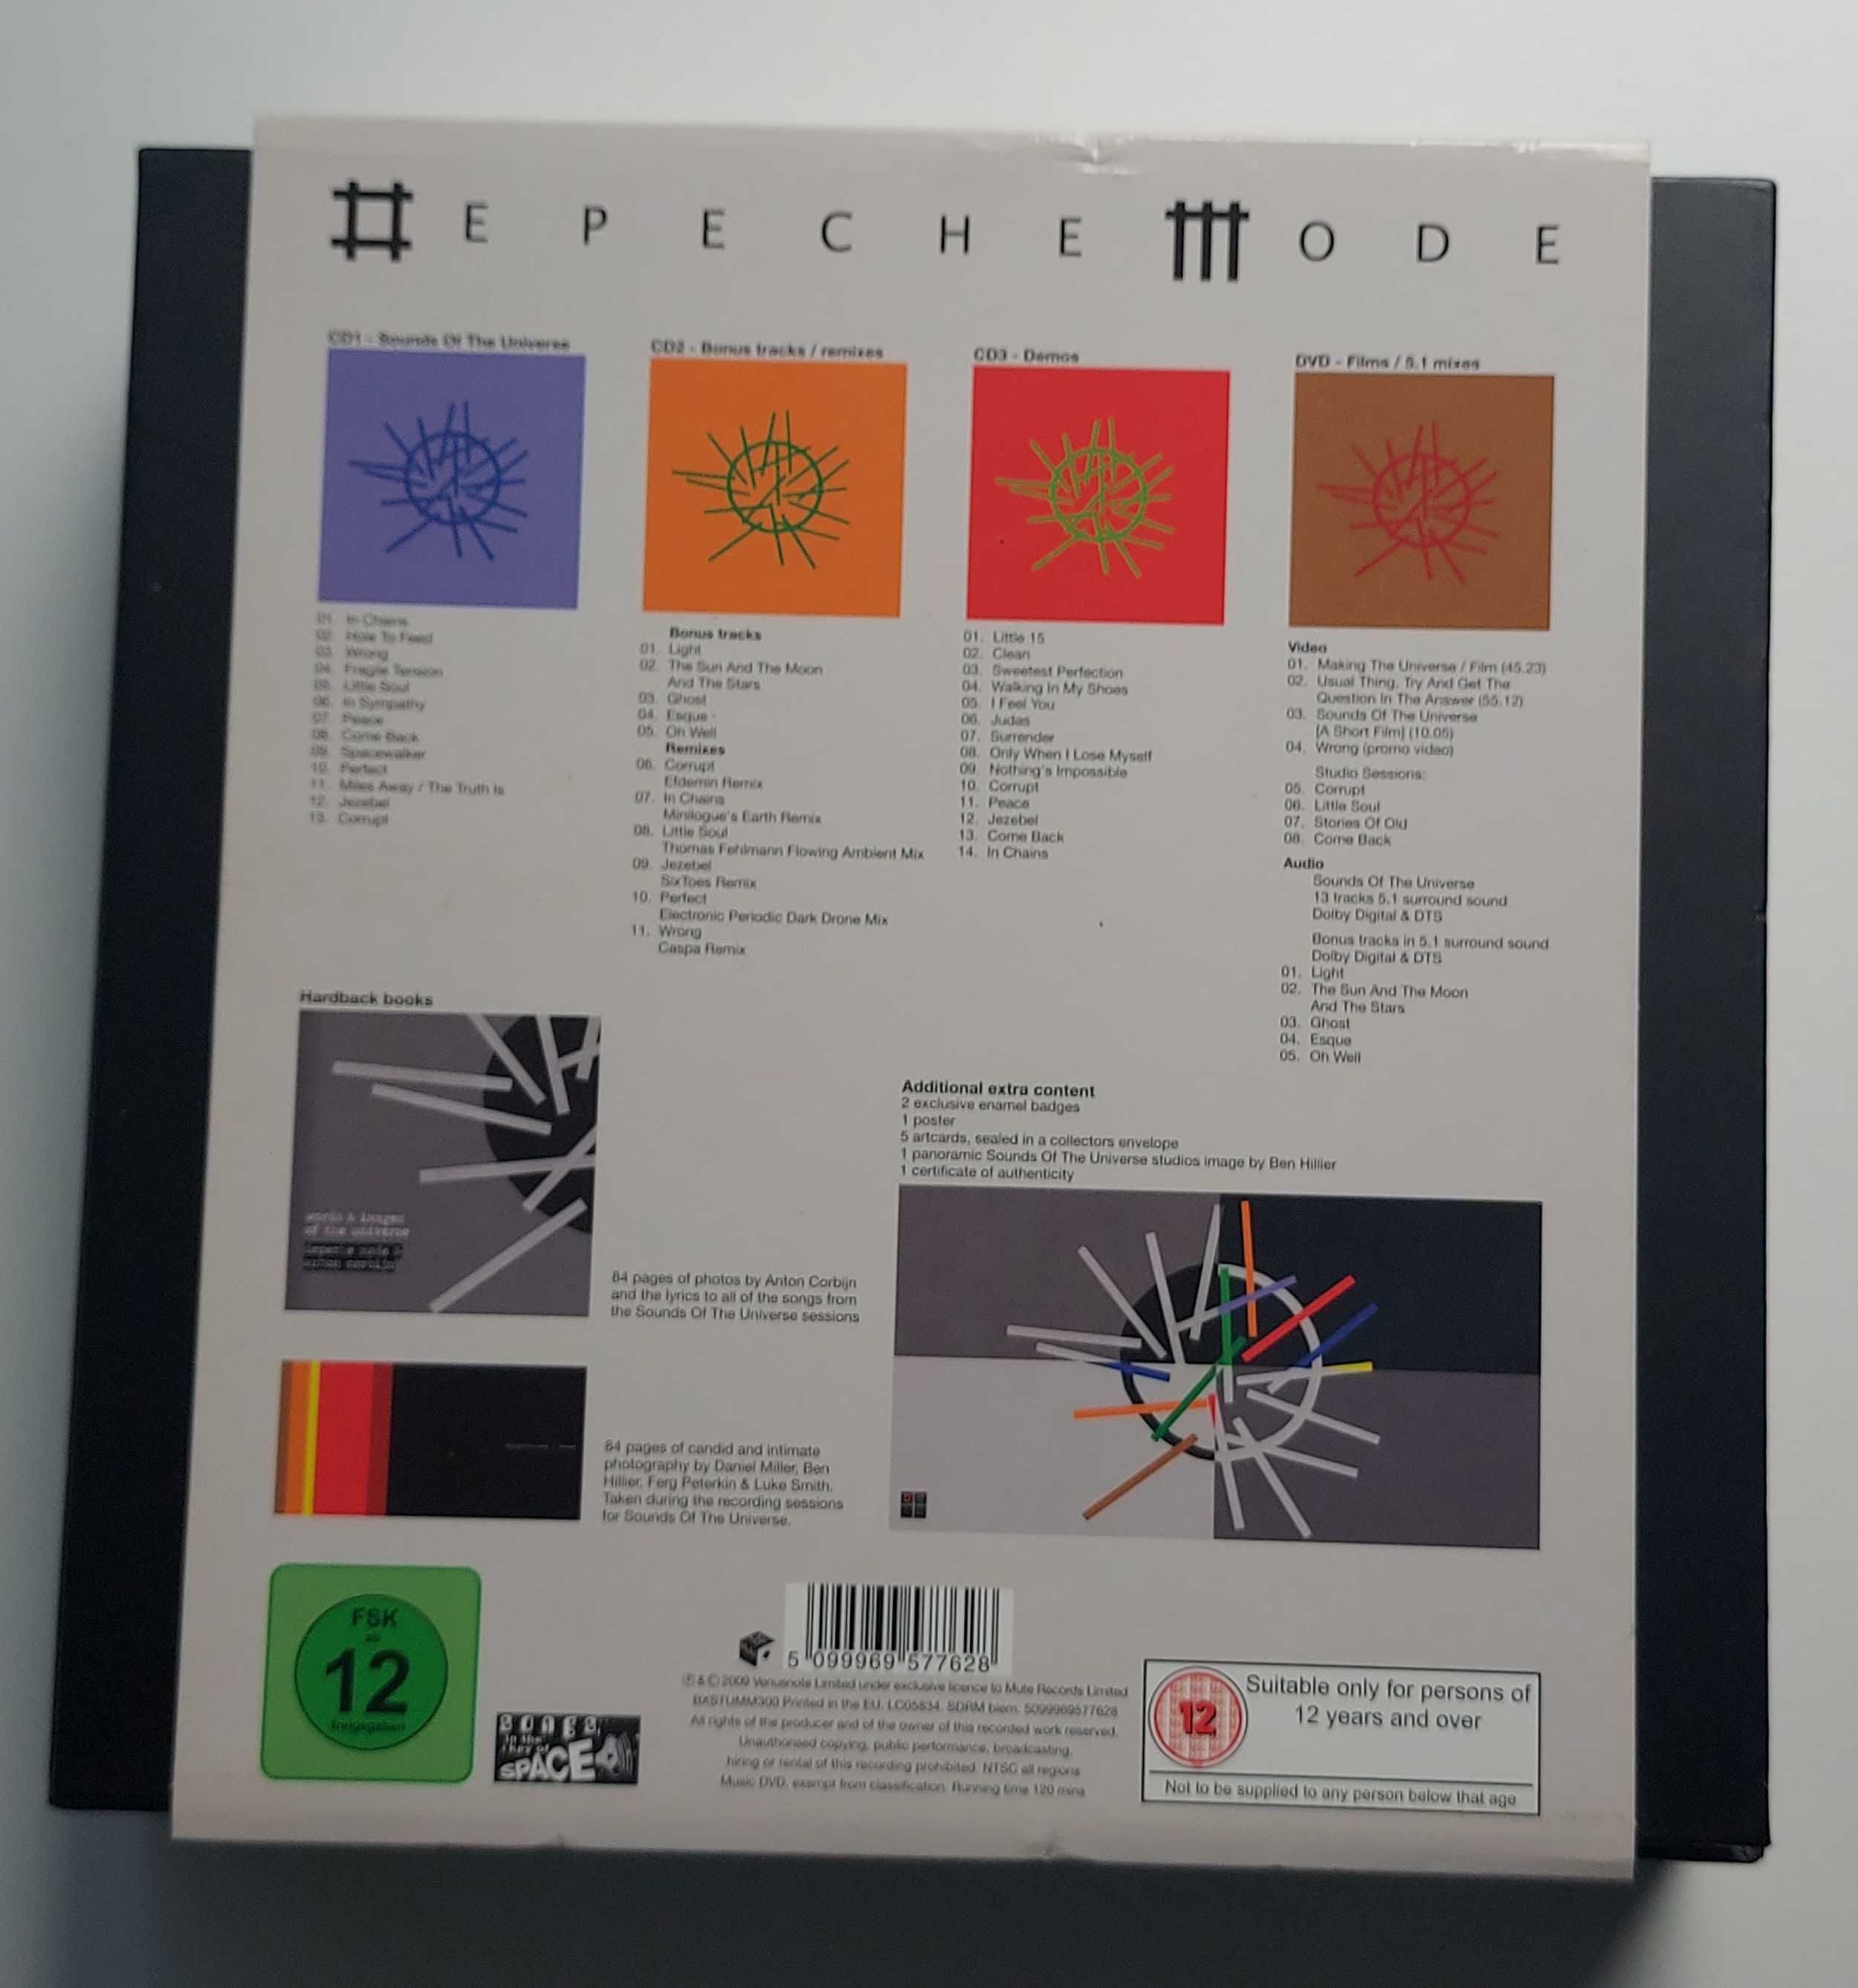 Depeche Mode - Sounds of the Universe - Deluxe Box Set